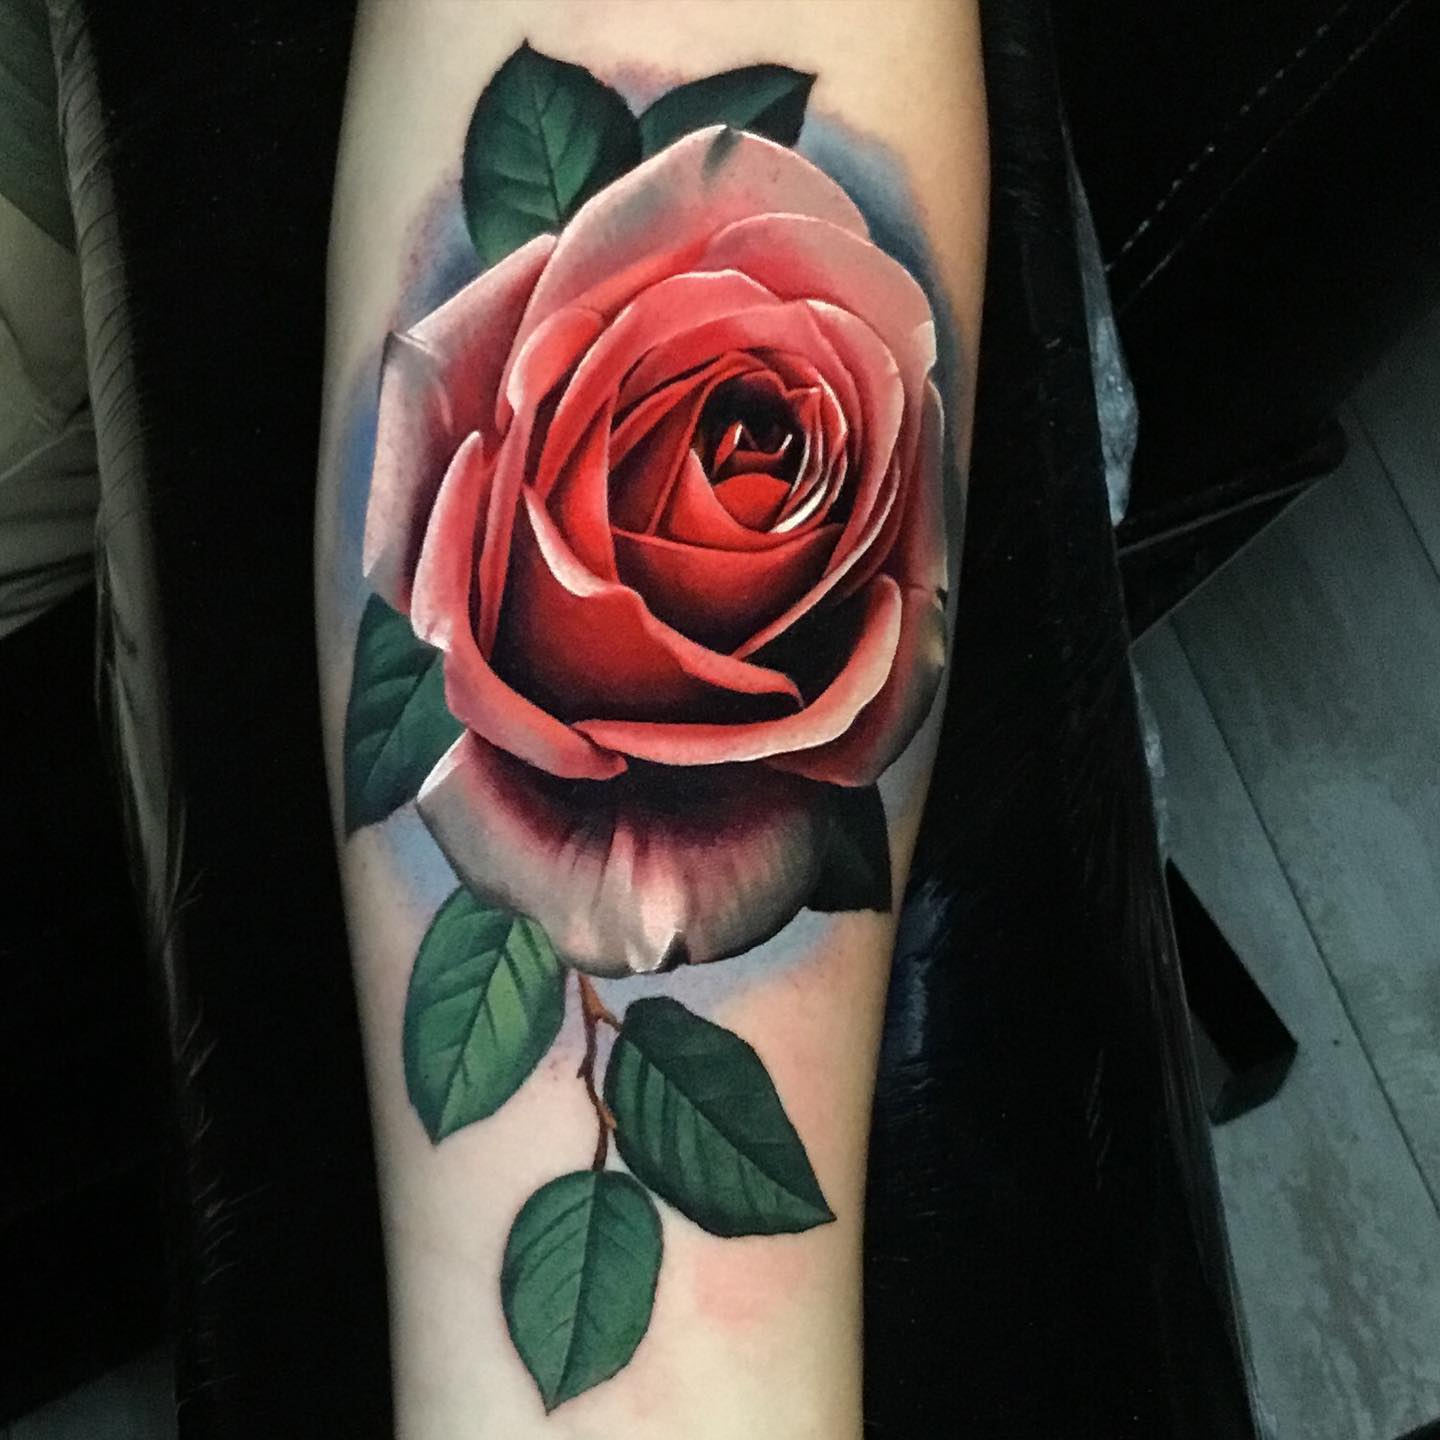 pink rose tattoo on a womans forearm